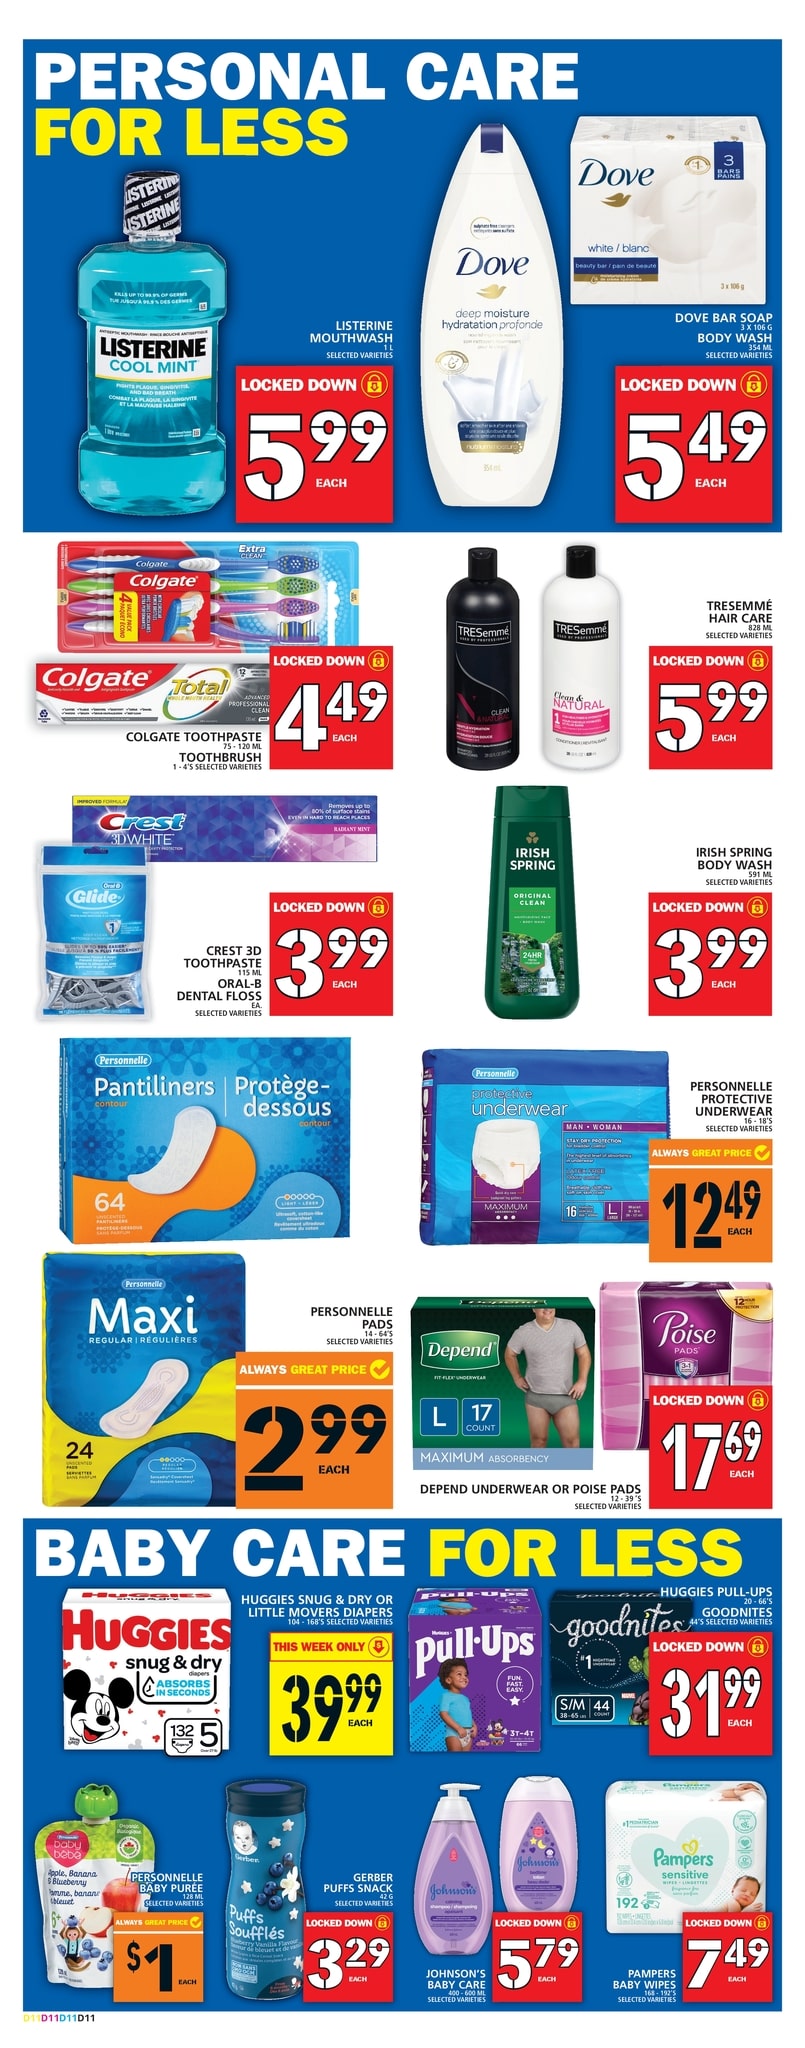 Food Basics - Weekly Flyer Specials - Page 12